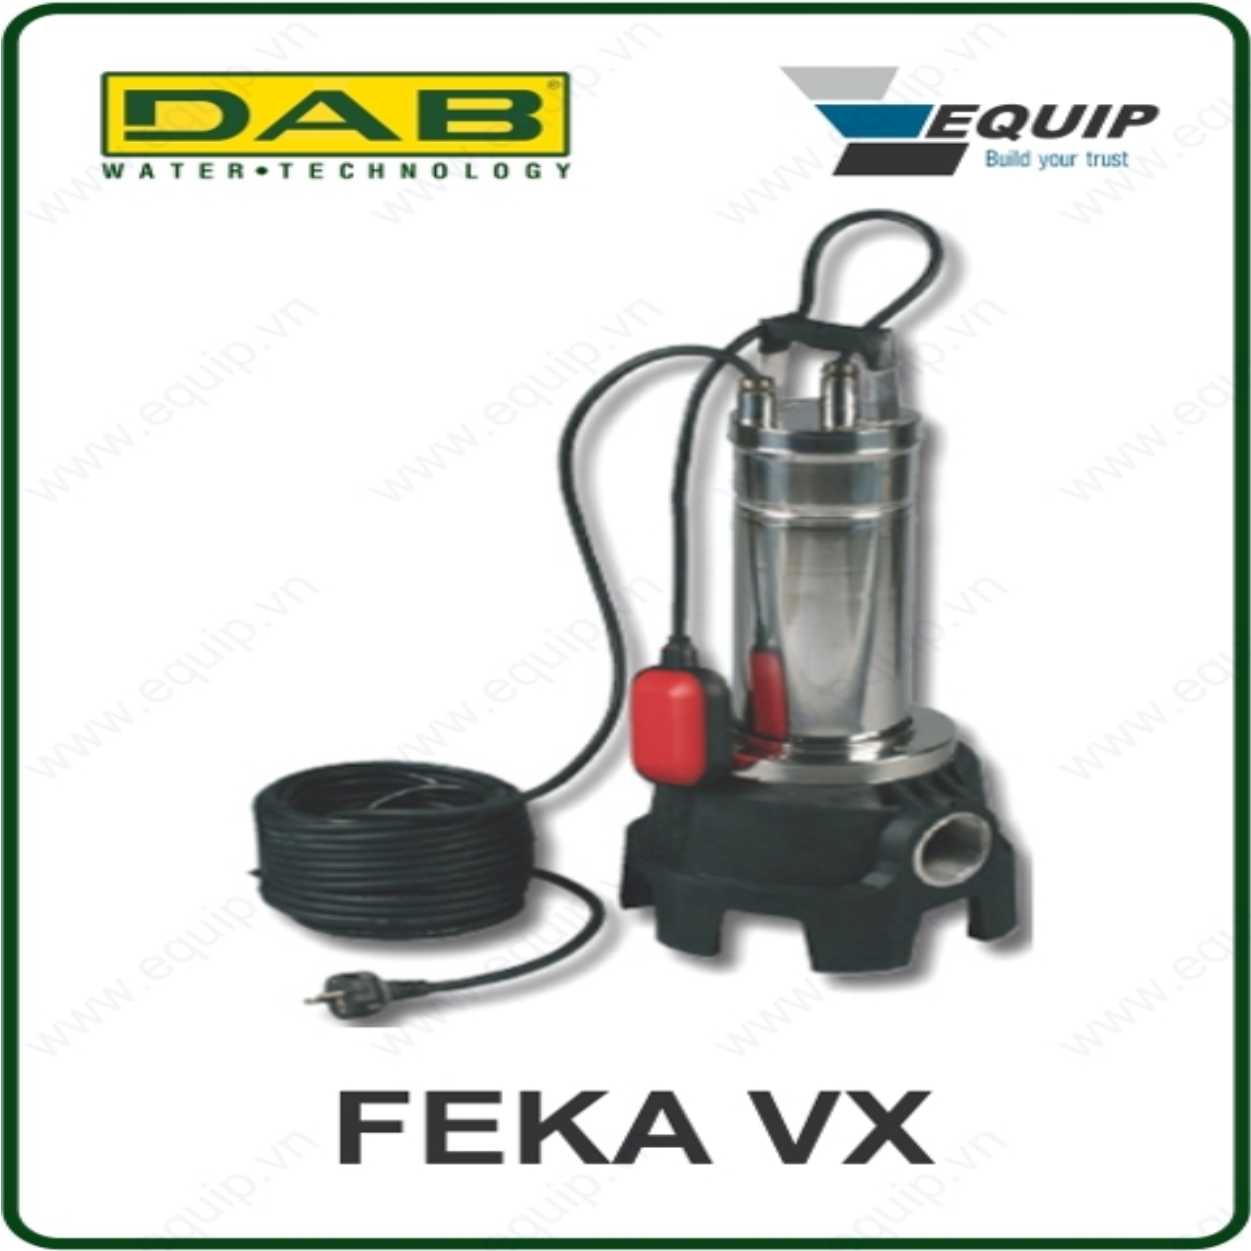 Submersible centrifugal pump for waste water